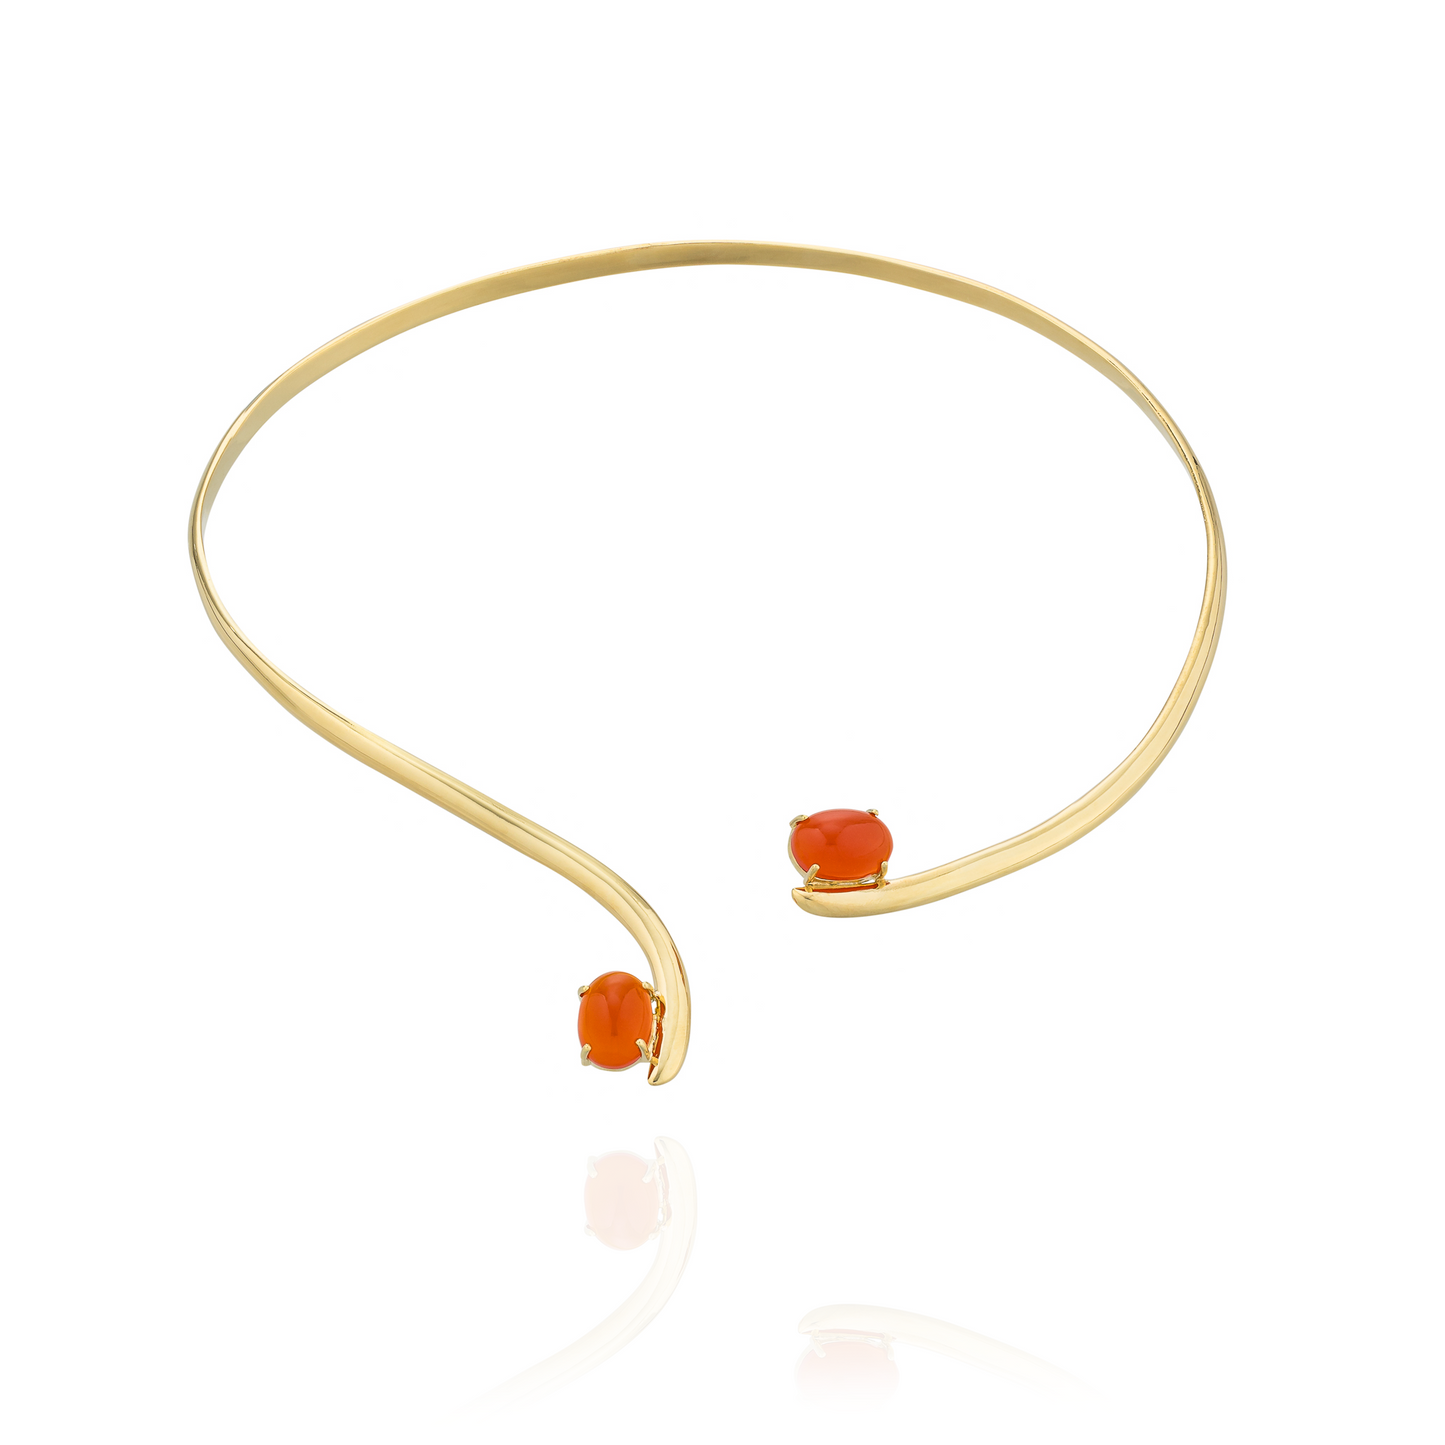 Caramelo 925 Silver Necklace  Yellow Gold Plated with Carnelian Cabouchon.